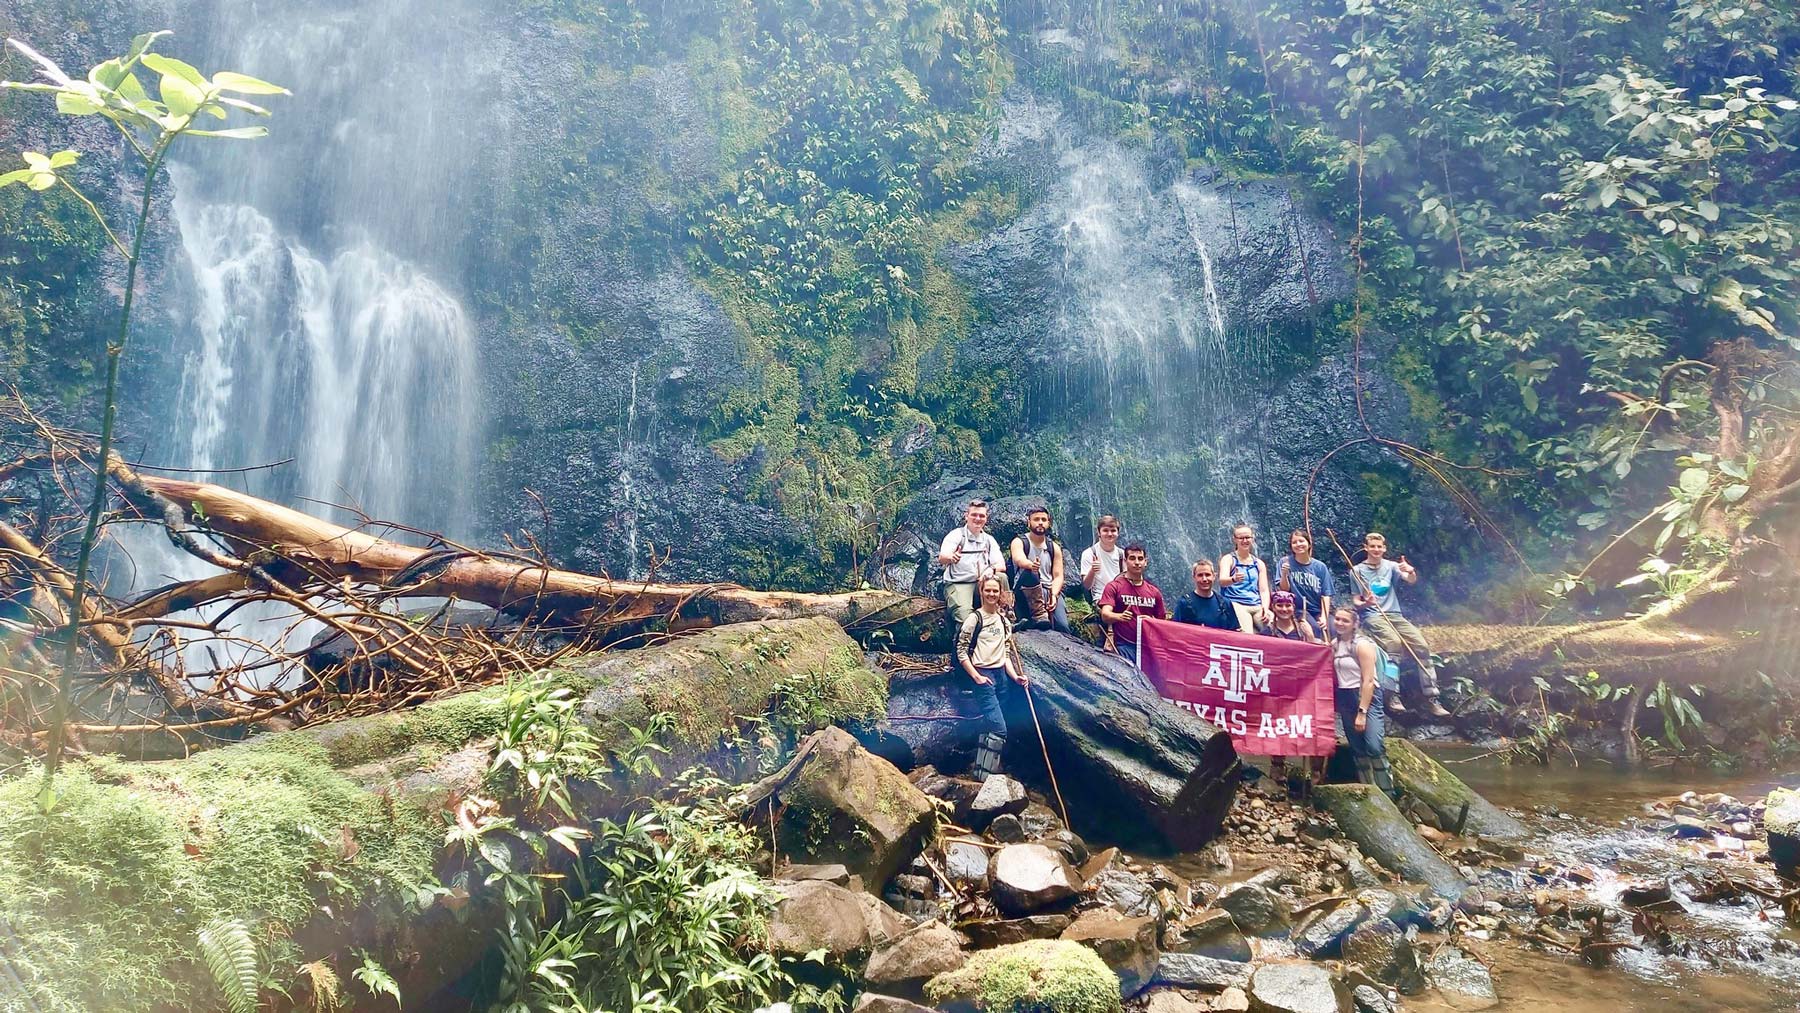 Texas A&amp;M students in front of a waterfall in Costa Rica